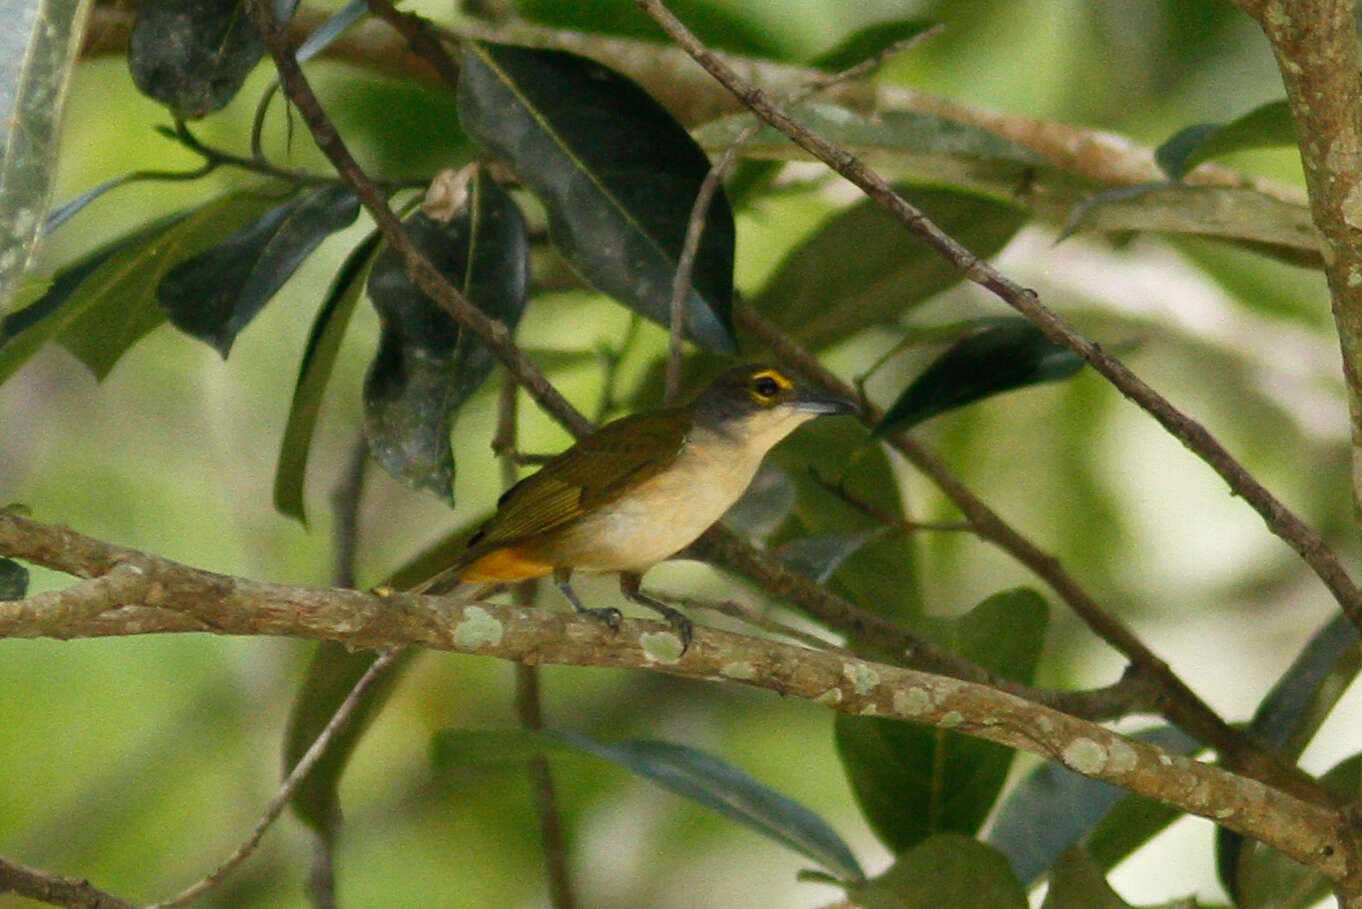 Image of Fulvous-crested Tanager